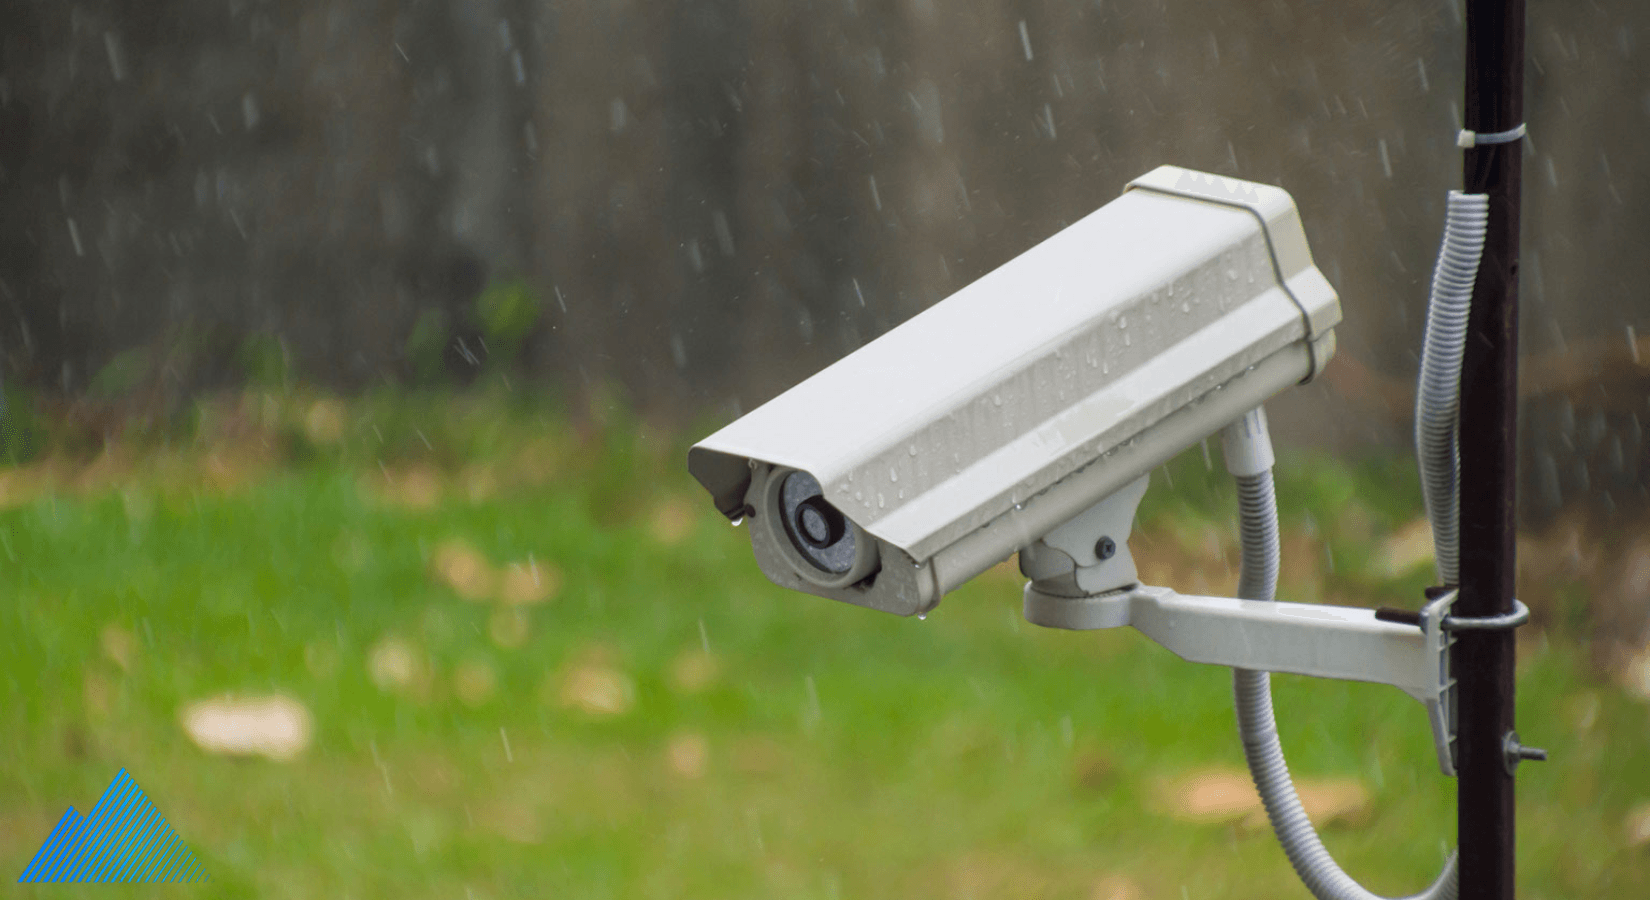 Security camera mounted on a pole in the rain